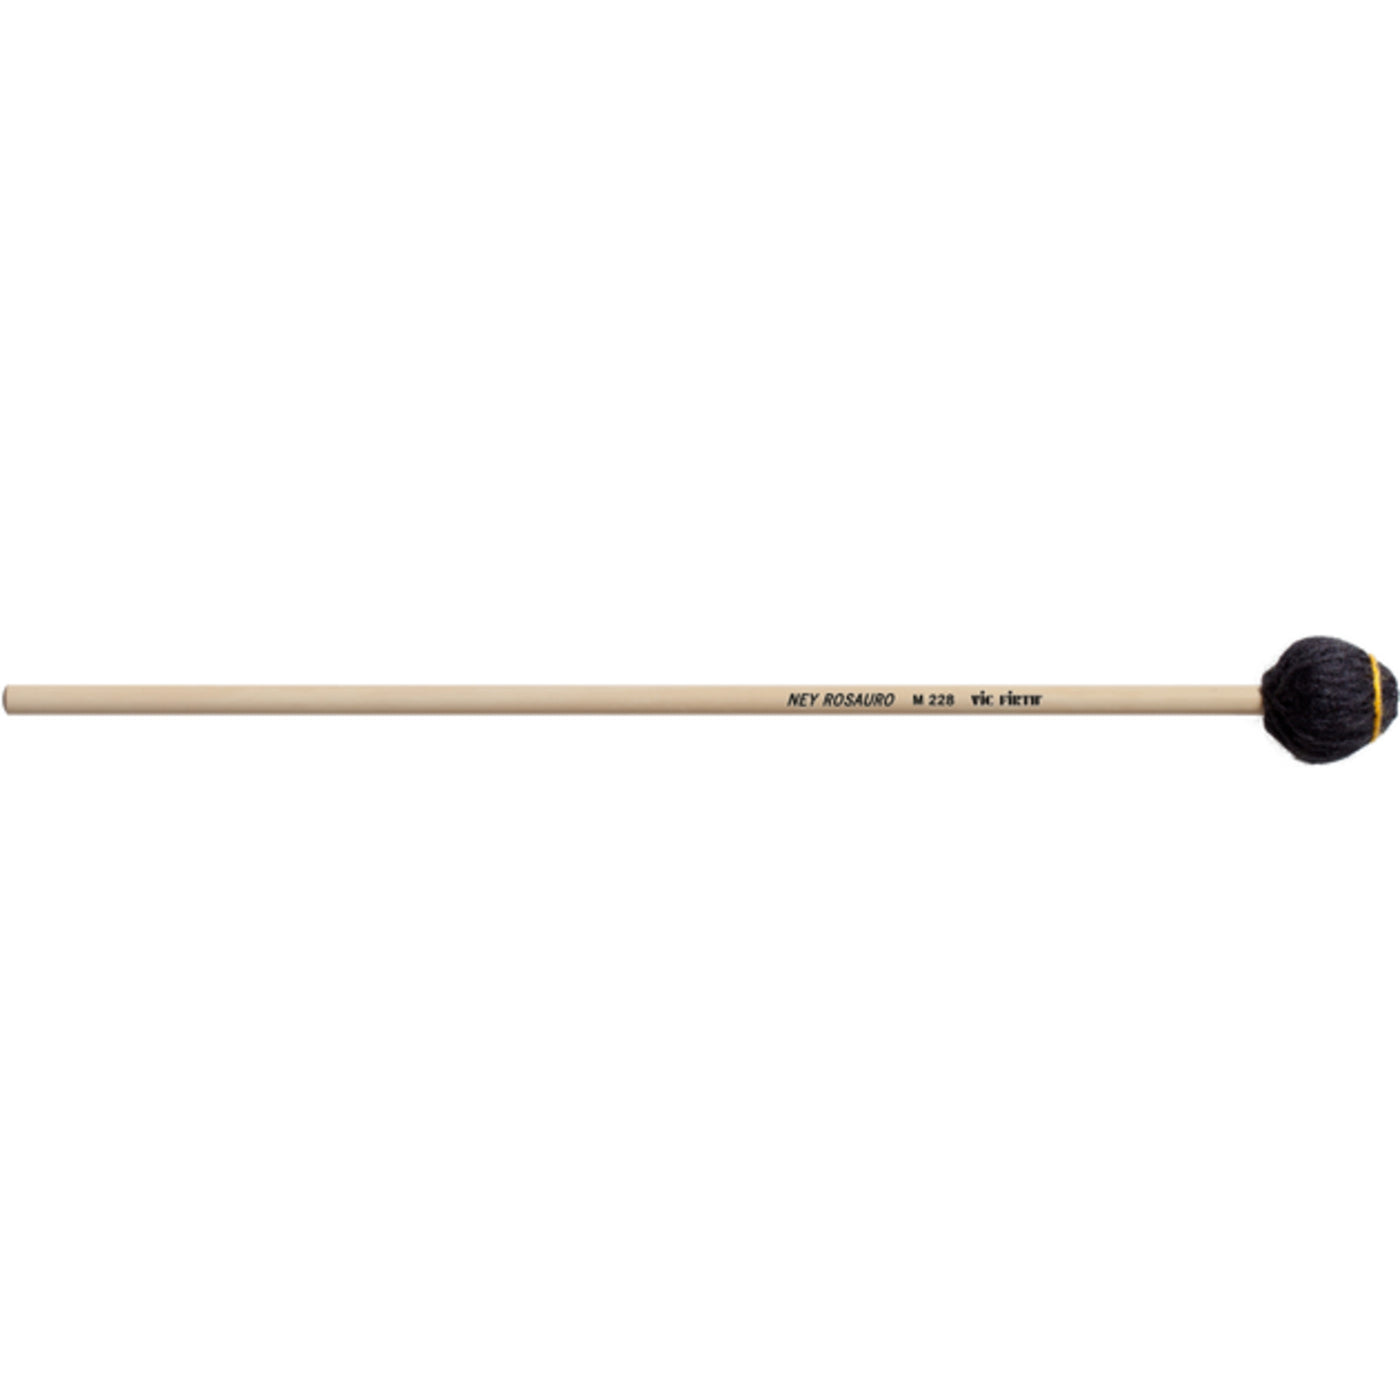 Vic Firth Ney Rosauro Keyboard - General Mallets (M228)